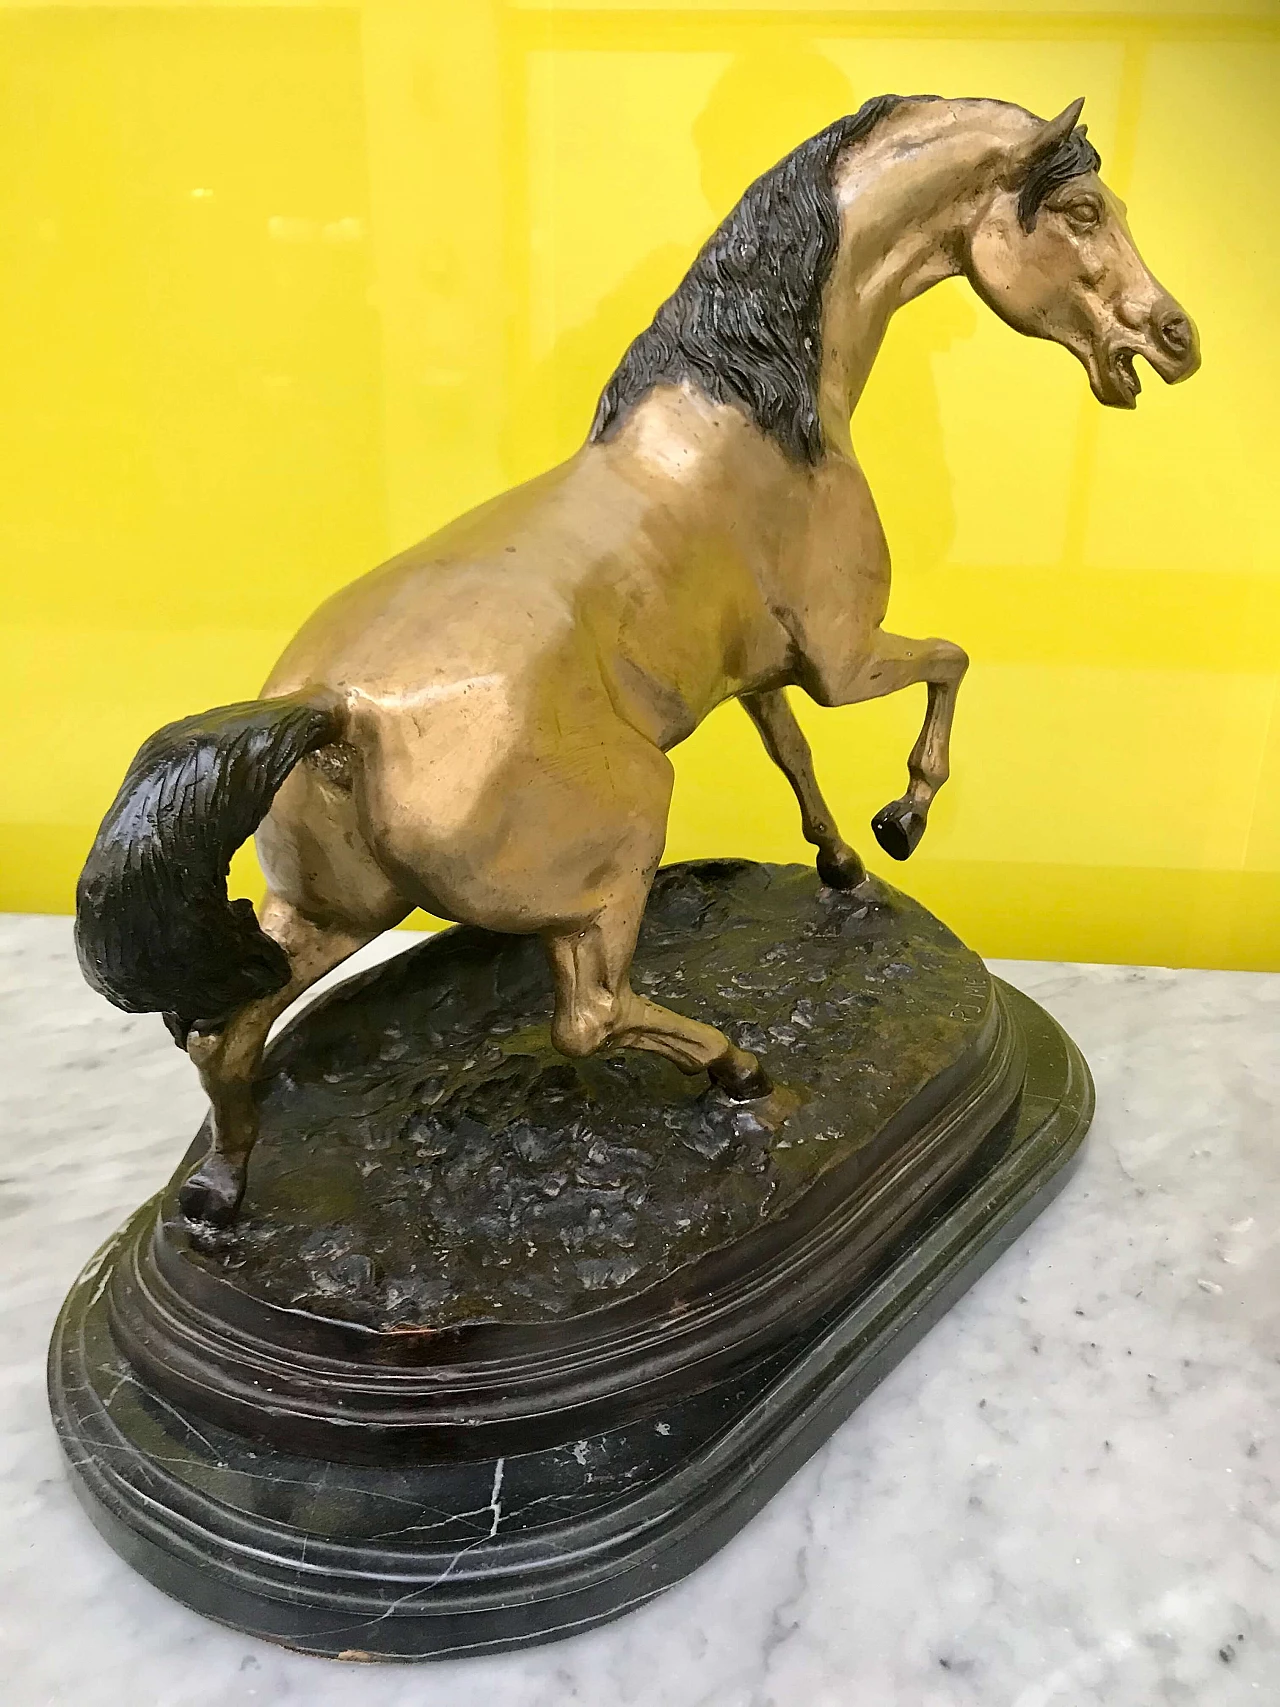 P.J.Mêne, gilded and burnished bronze sculpture of a "Horse" with black marble base, original 19th century 1177732